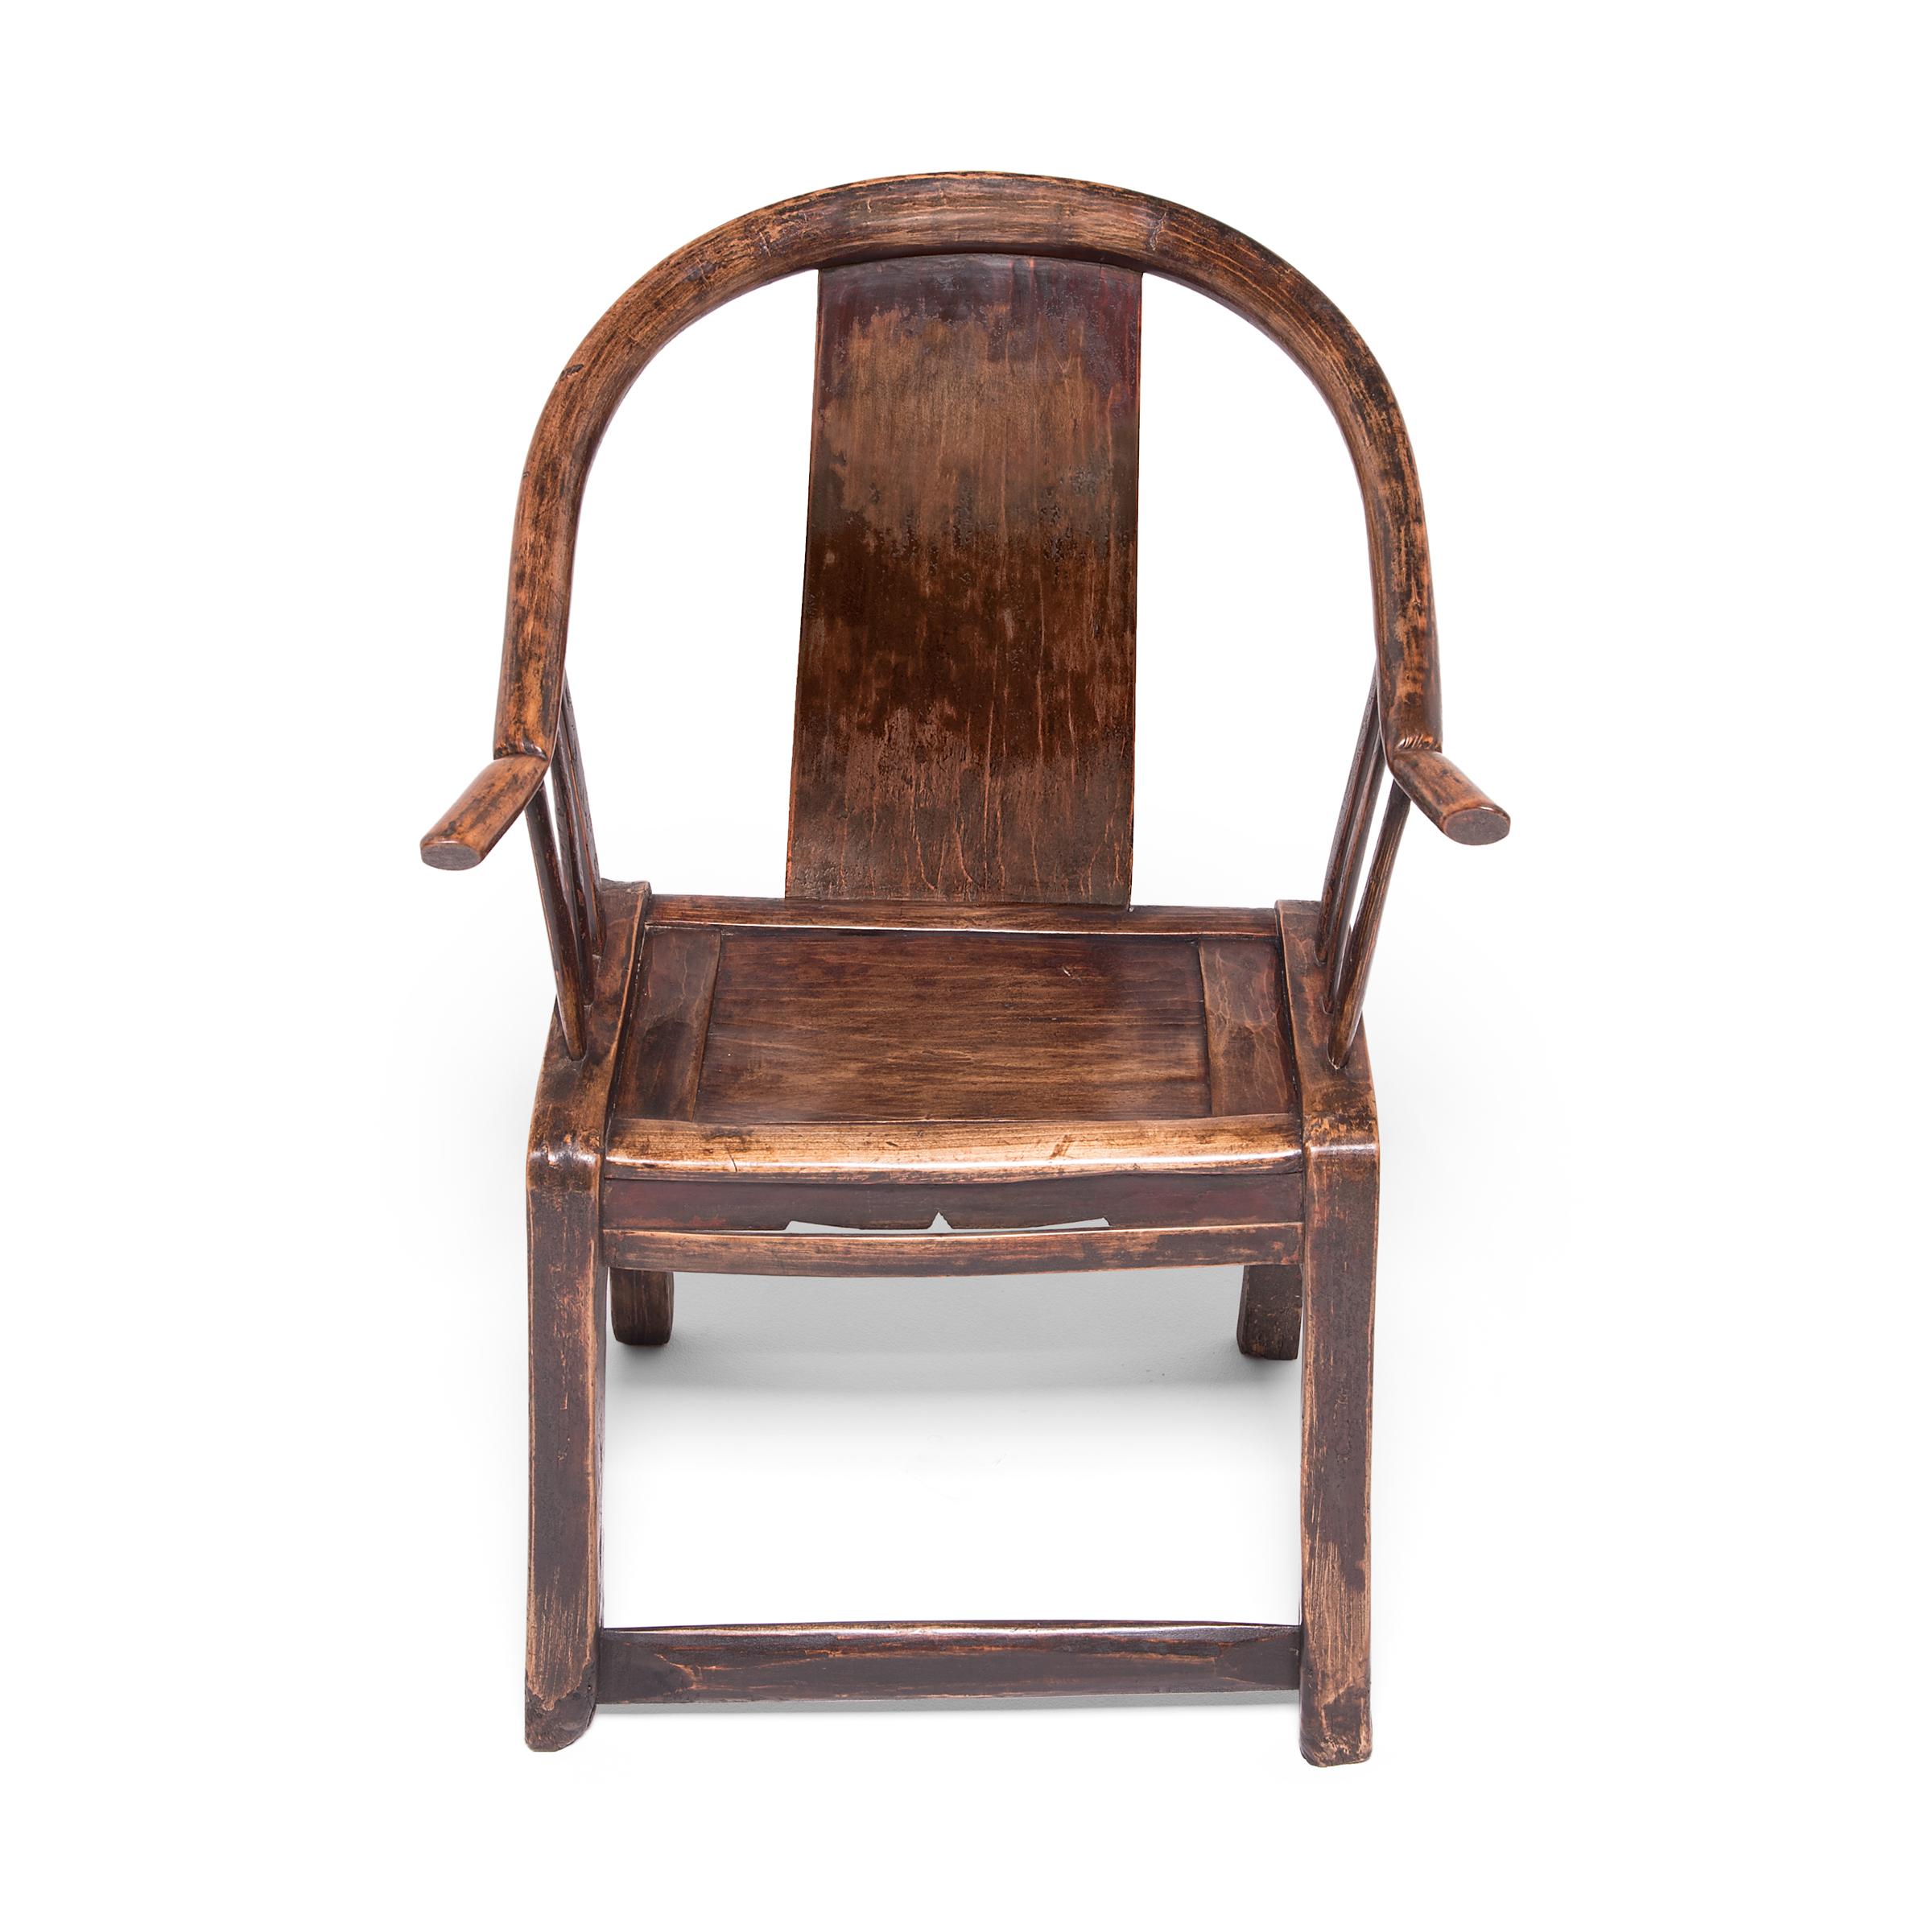 Lacquered Chinese Moongazing Chair with Upturned Arms, c. 1850